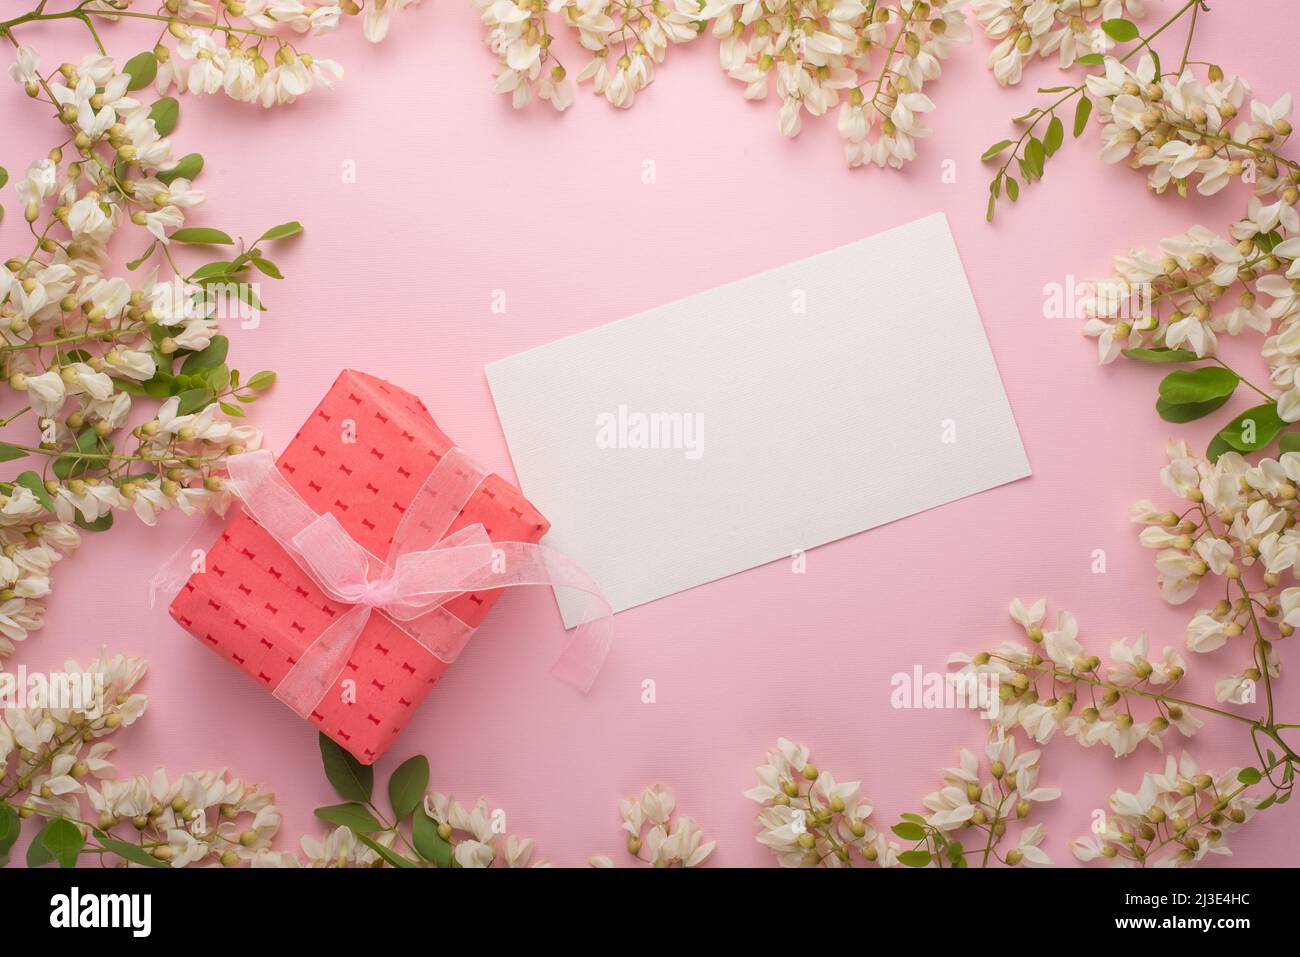 Spring floral background with gift, texture and wallpaper. Flat white flower flowers on a light pink background, top view, copy space. Festive greetin Stock Photo